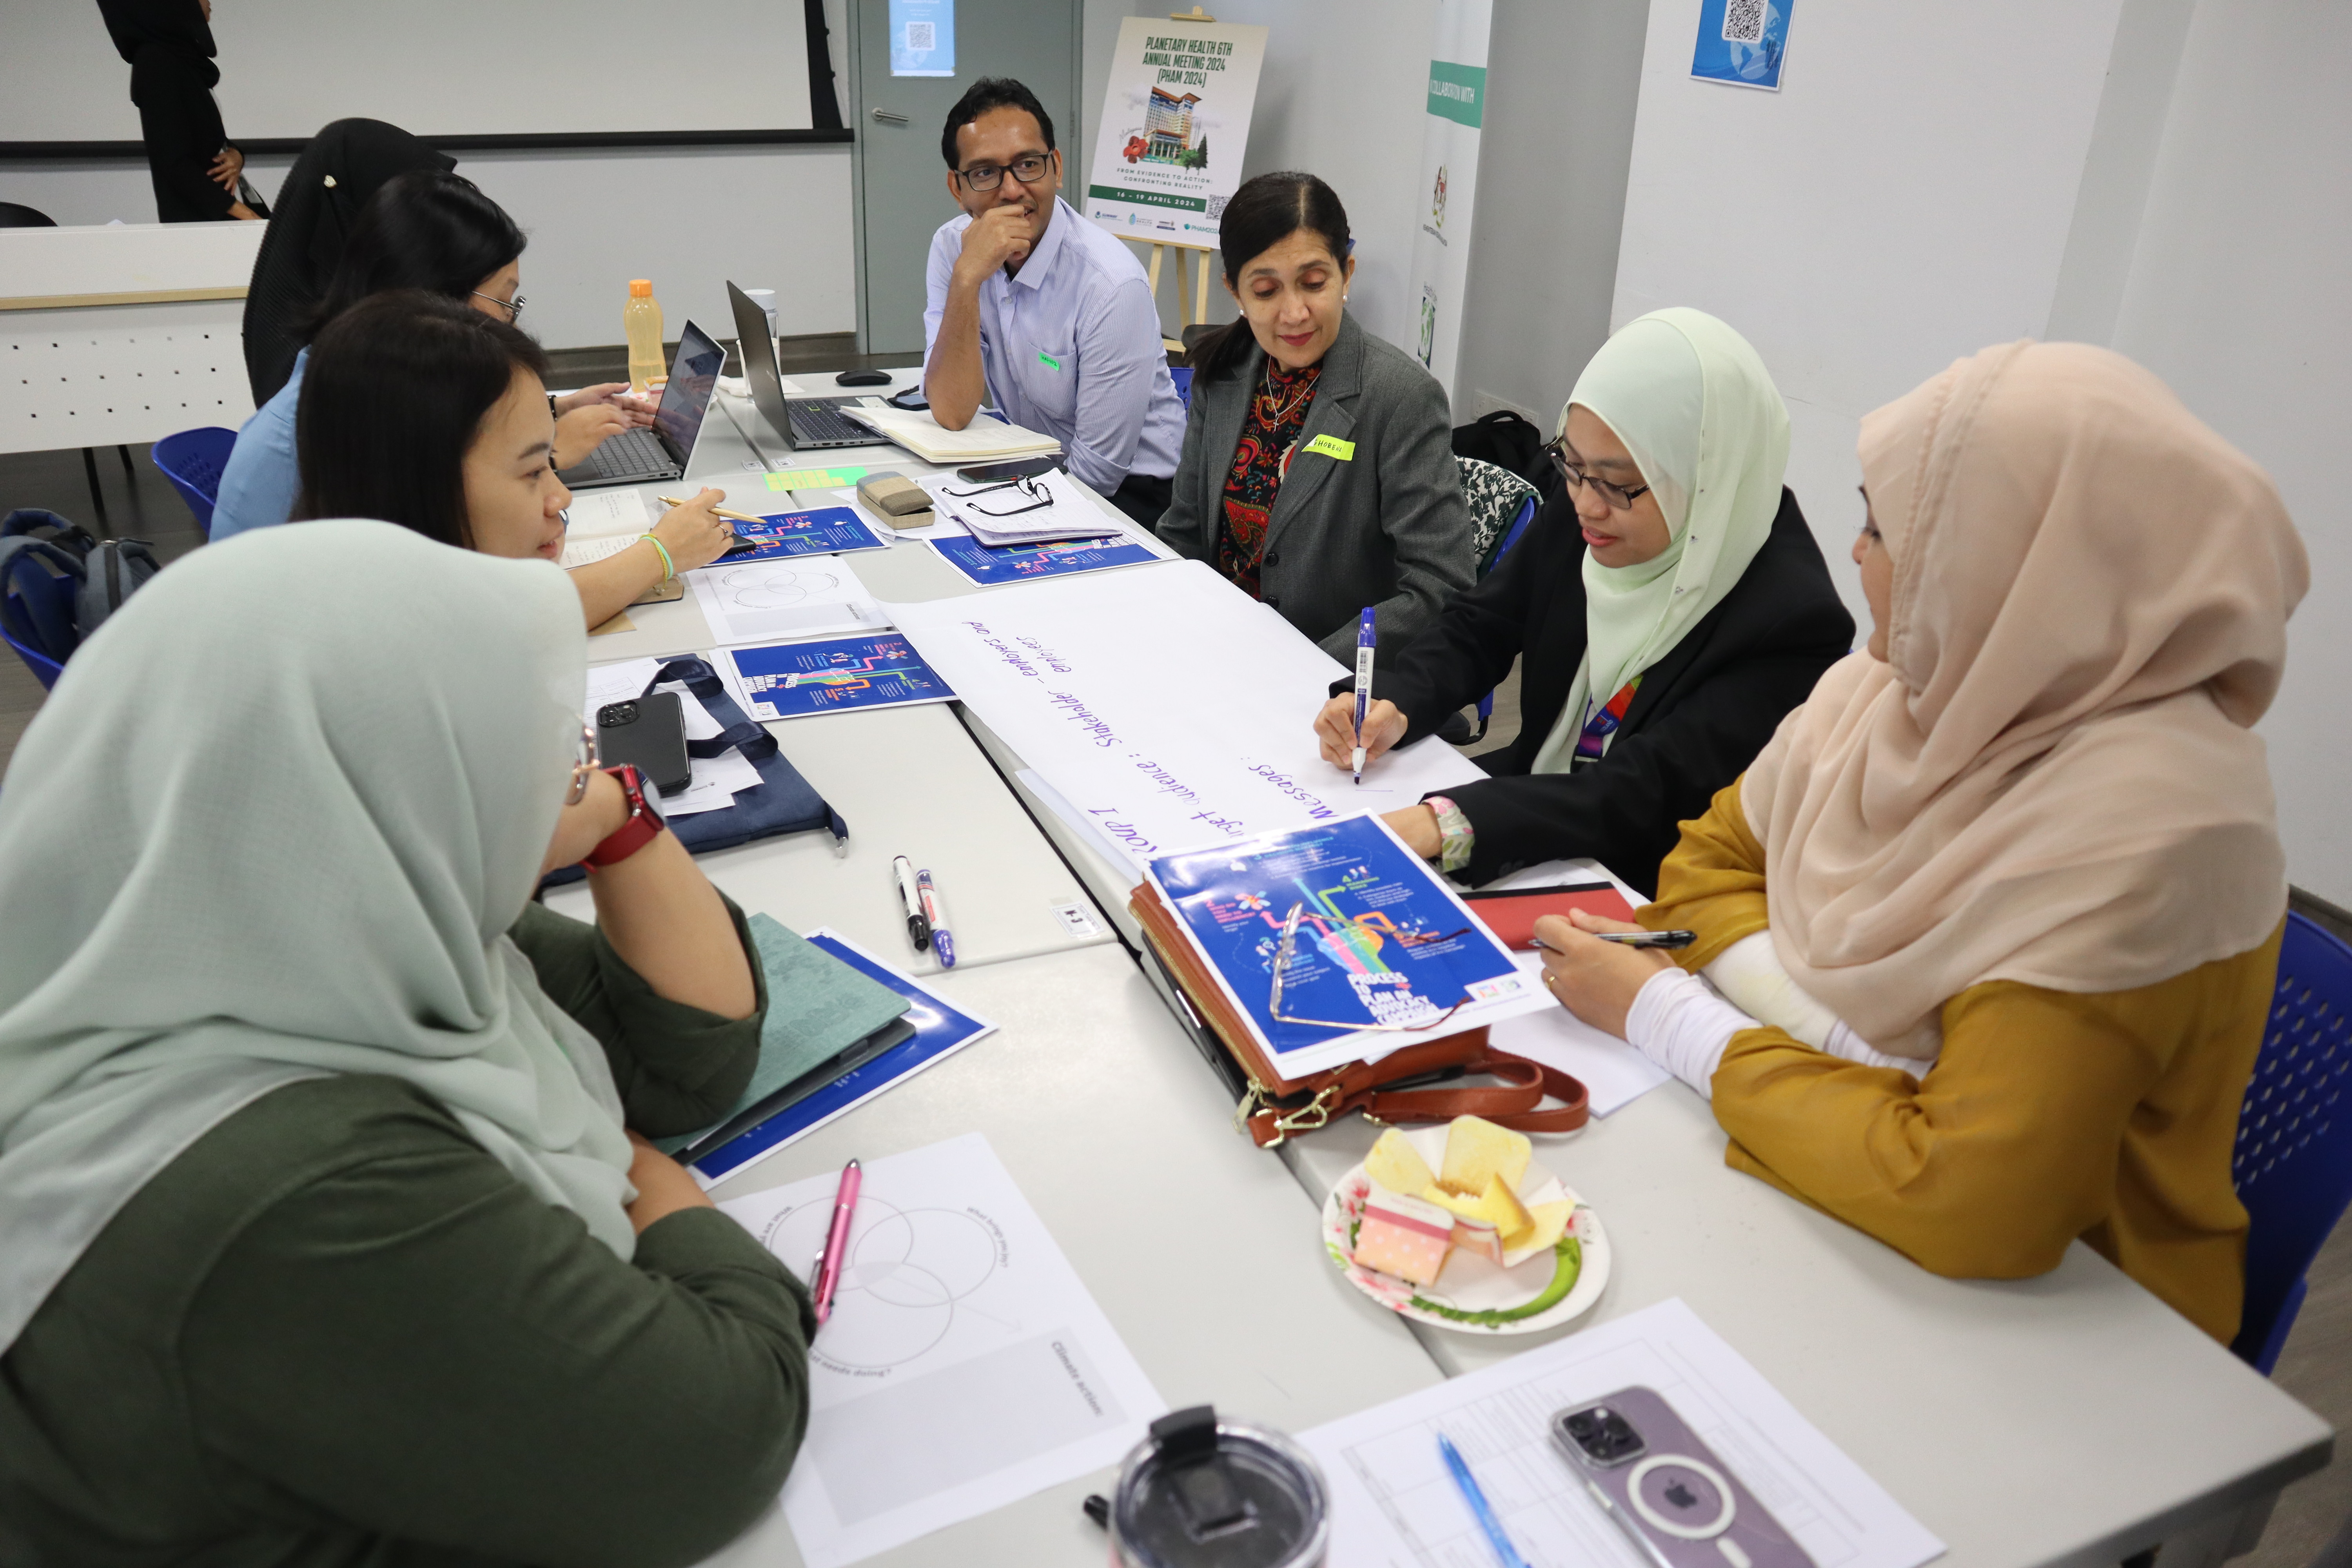  Climate and Health Campaign and Advocacy Training in Malaysia - HCWH Asia